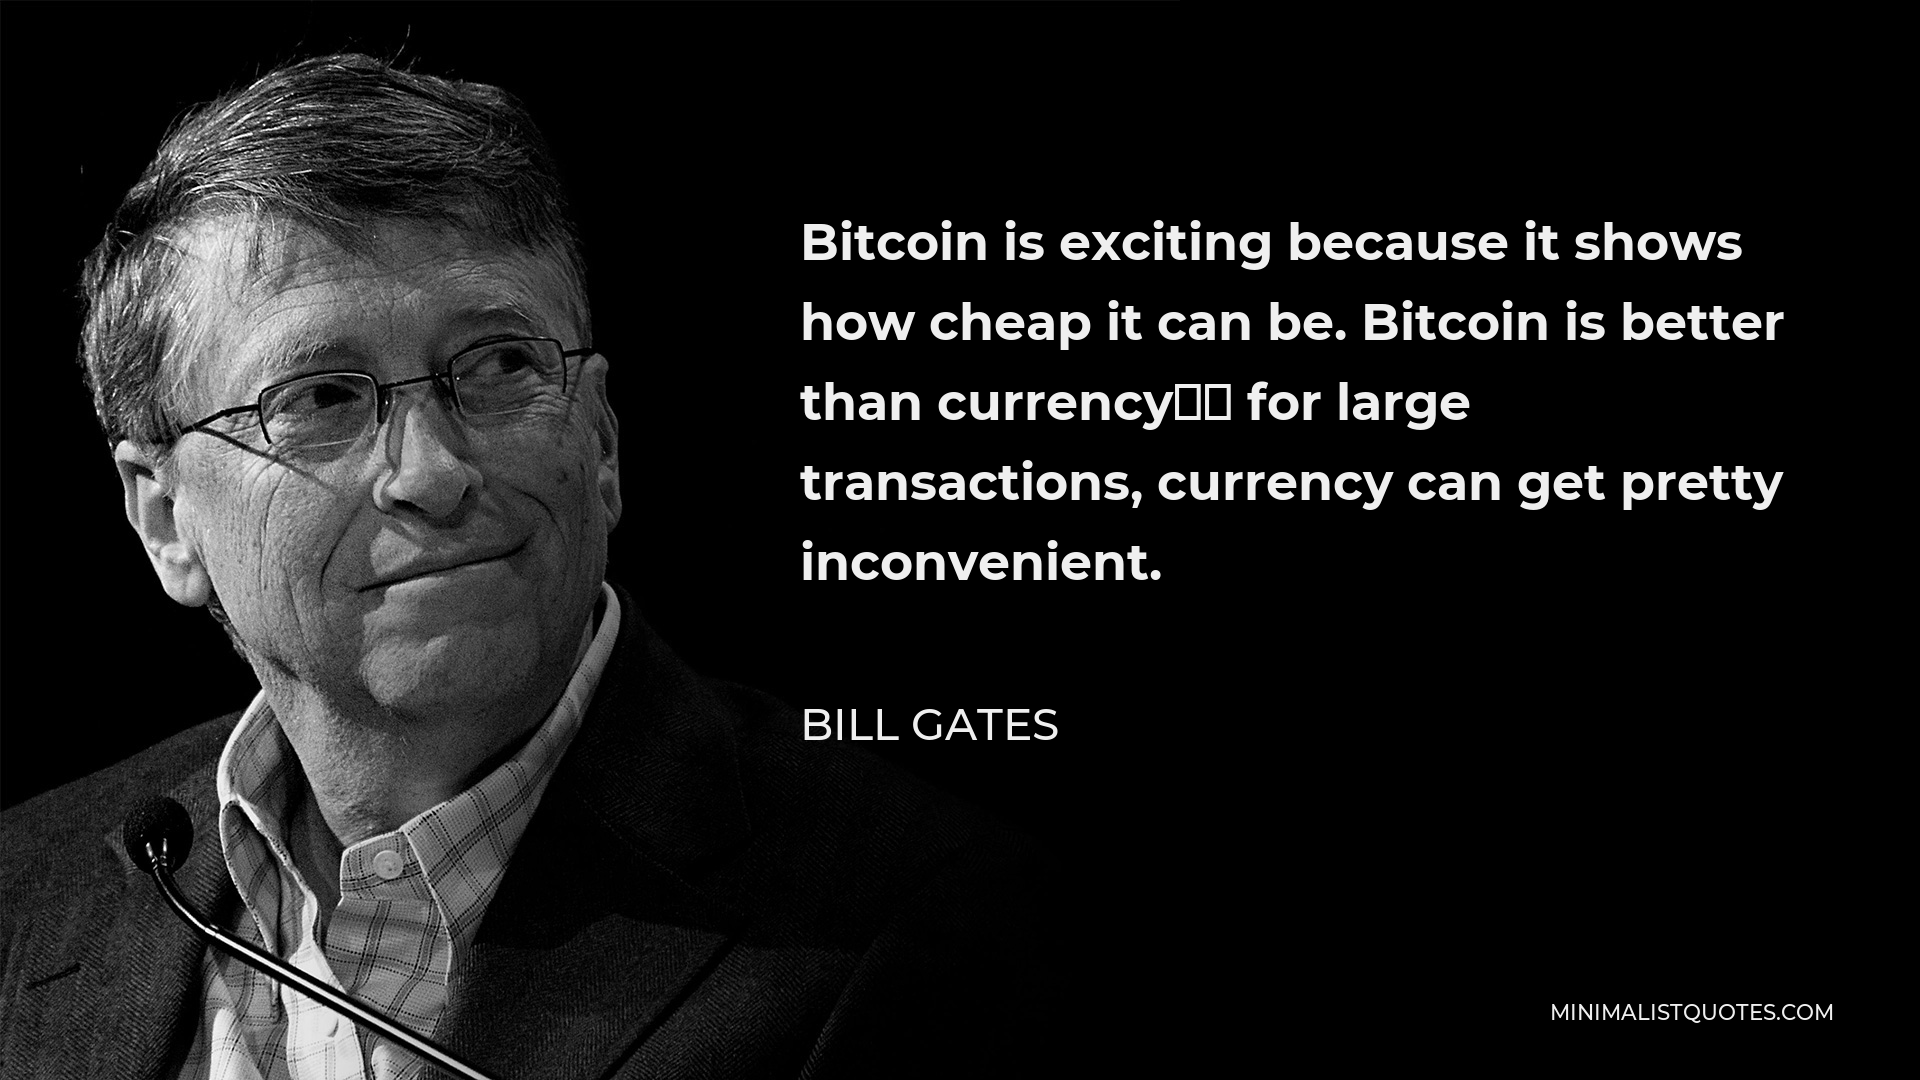 Bill Gates Quote - Bitcoin is exciting because it shows how cheap it can be. Bitcoin is better than currency… for large transactions, currency can get pretty inconvenient.